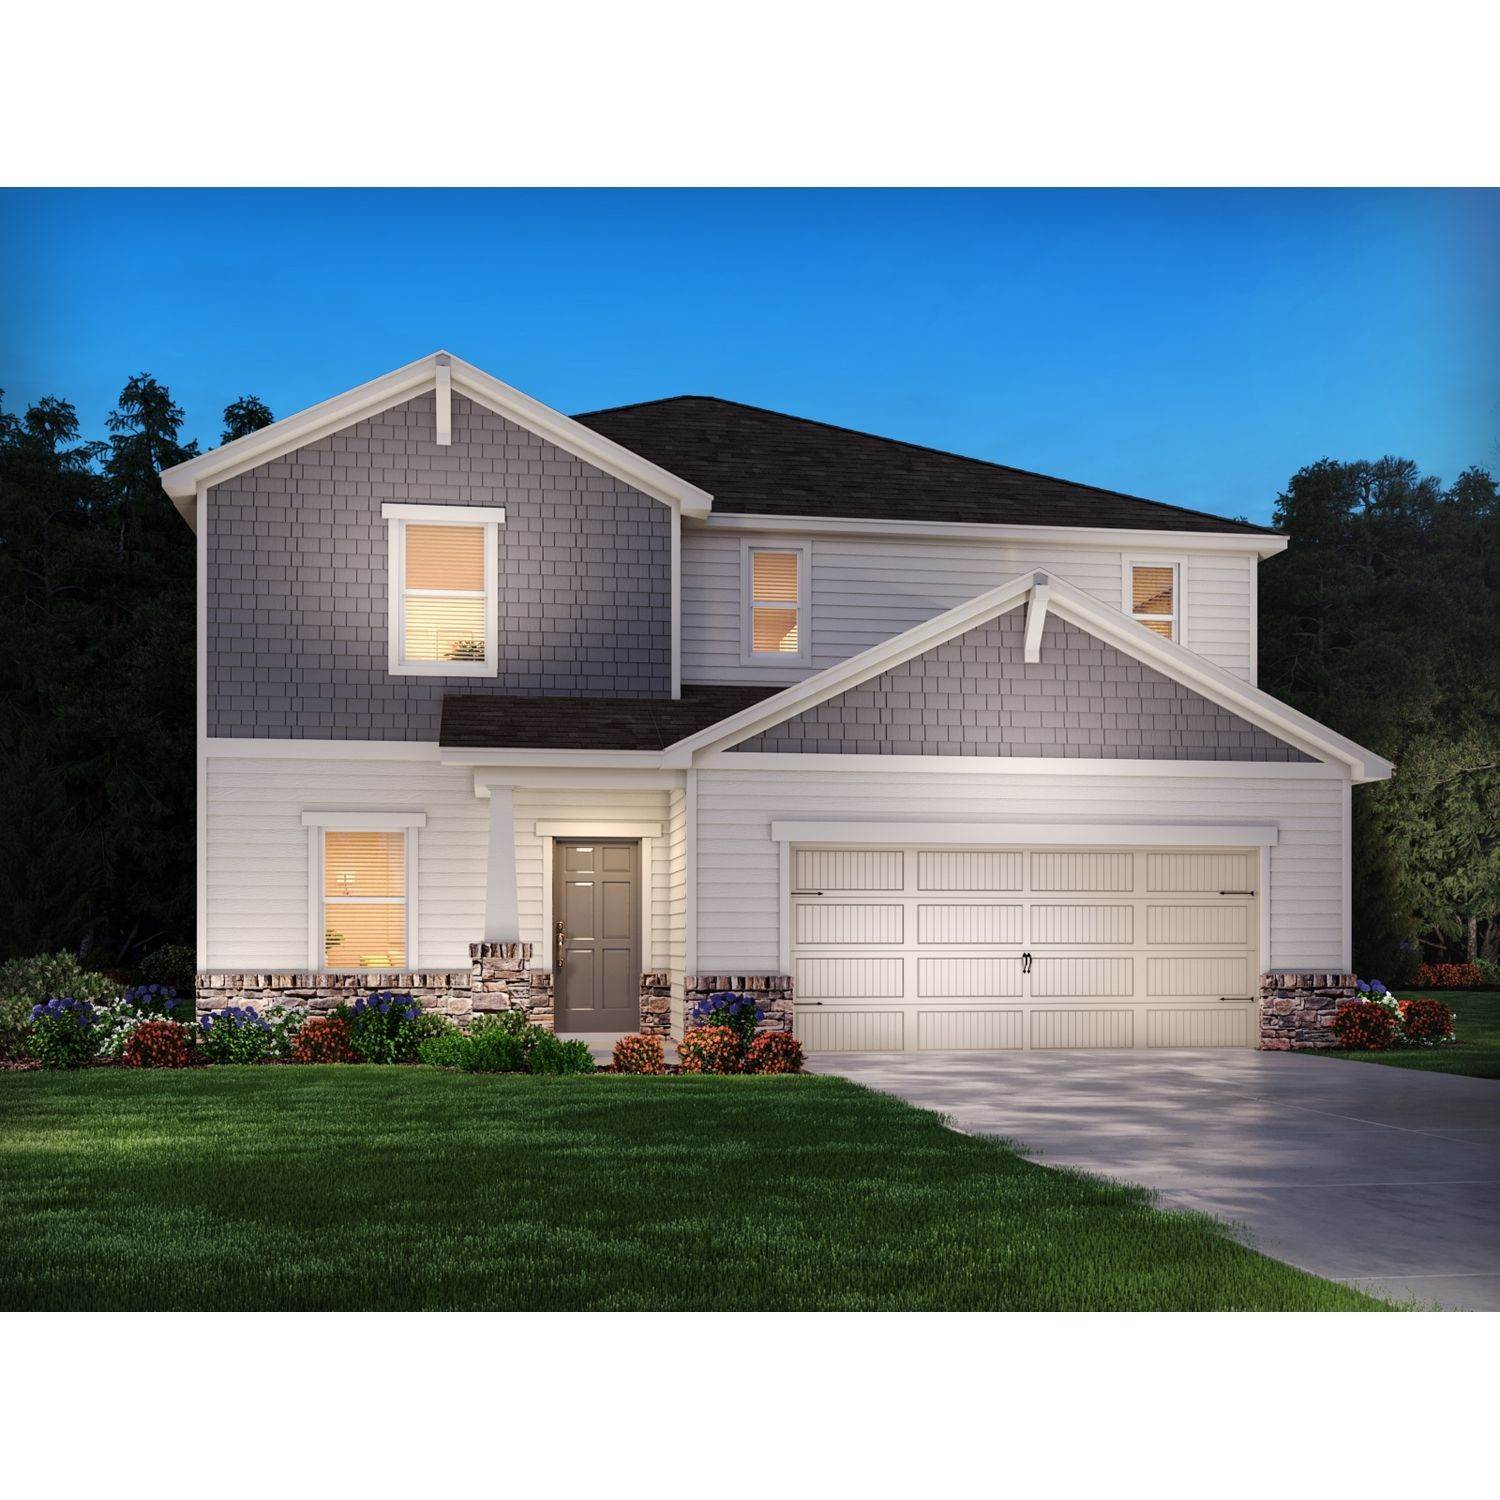 Single Family for Sale at Mooresville, NC 28115